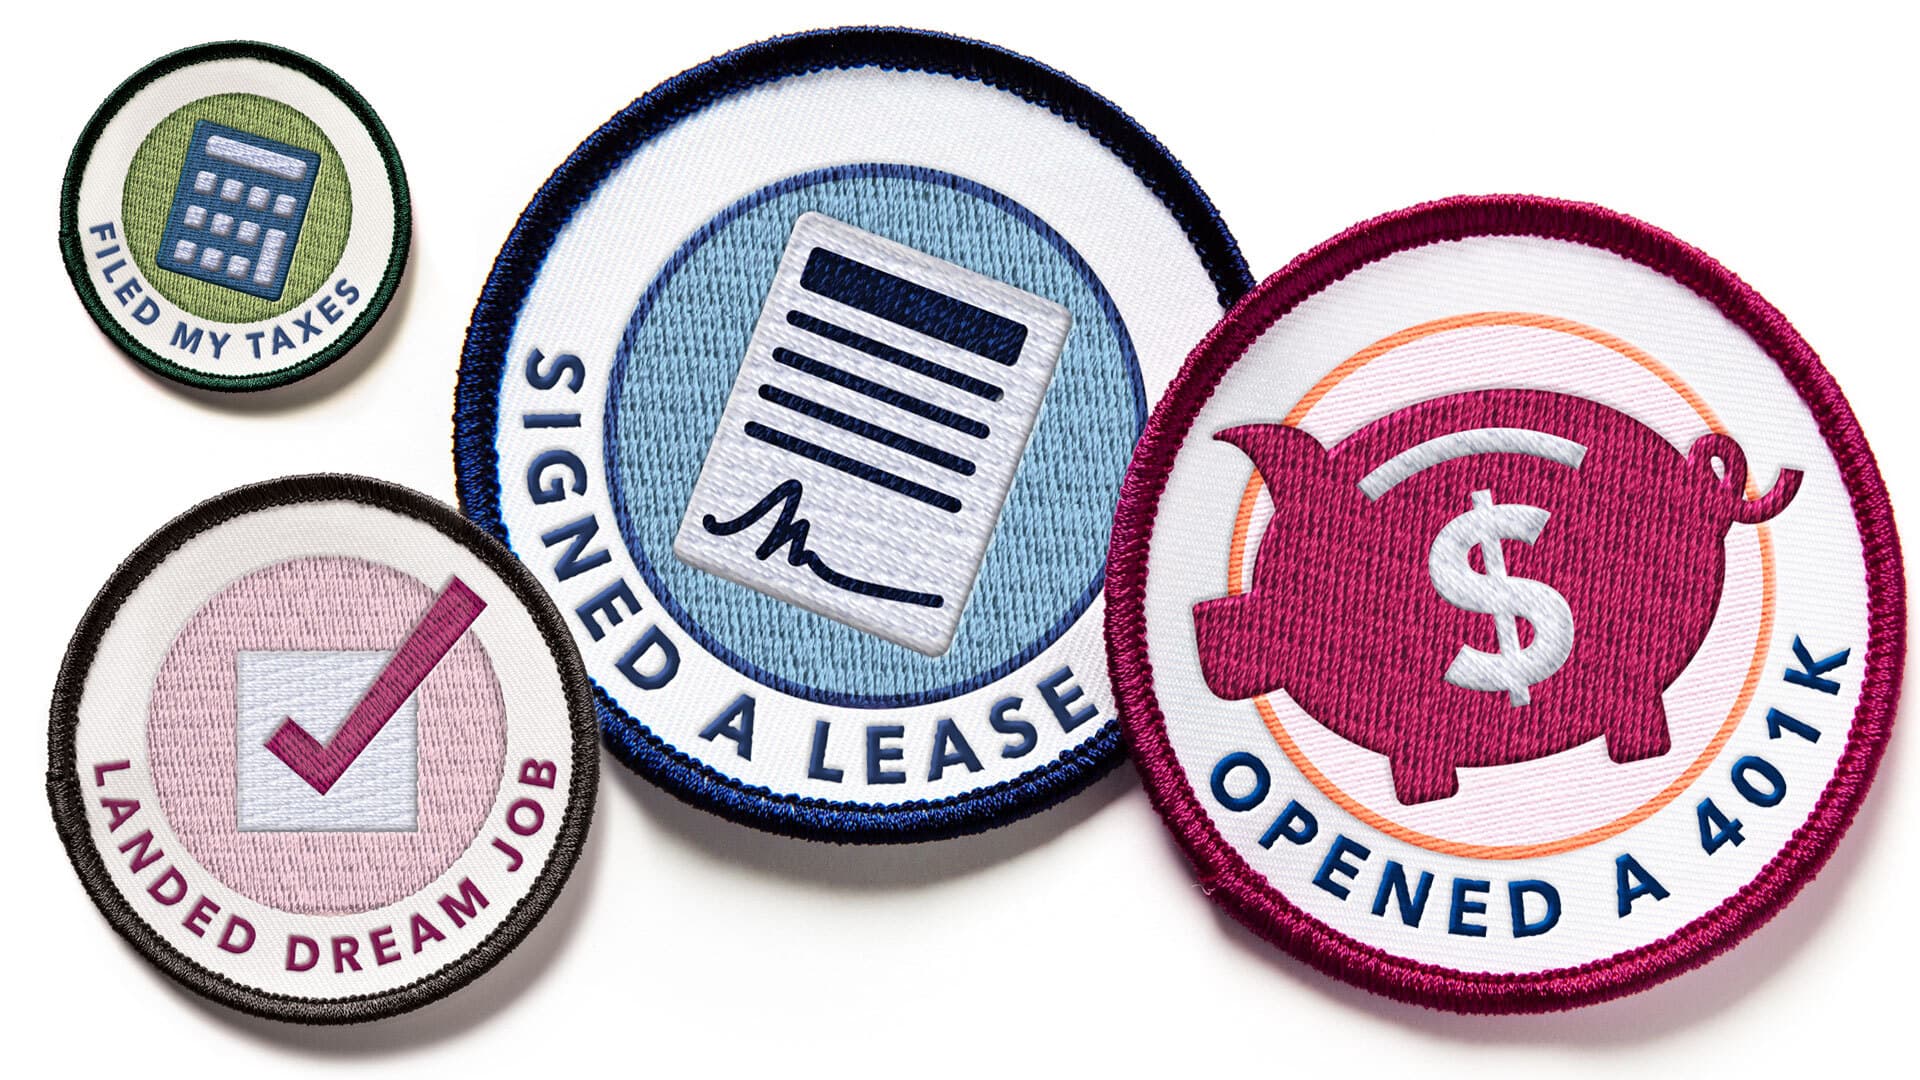 Patches that read, "Filed my taxes," "landed dream job," "signed a lease" and "opened a 401K"